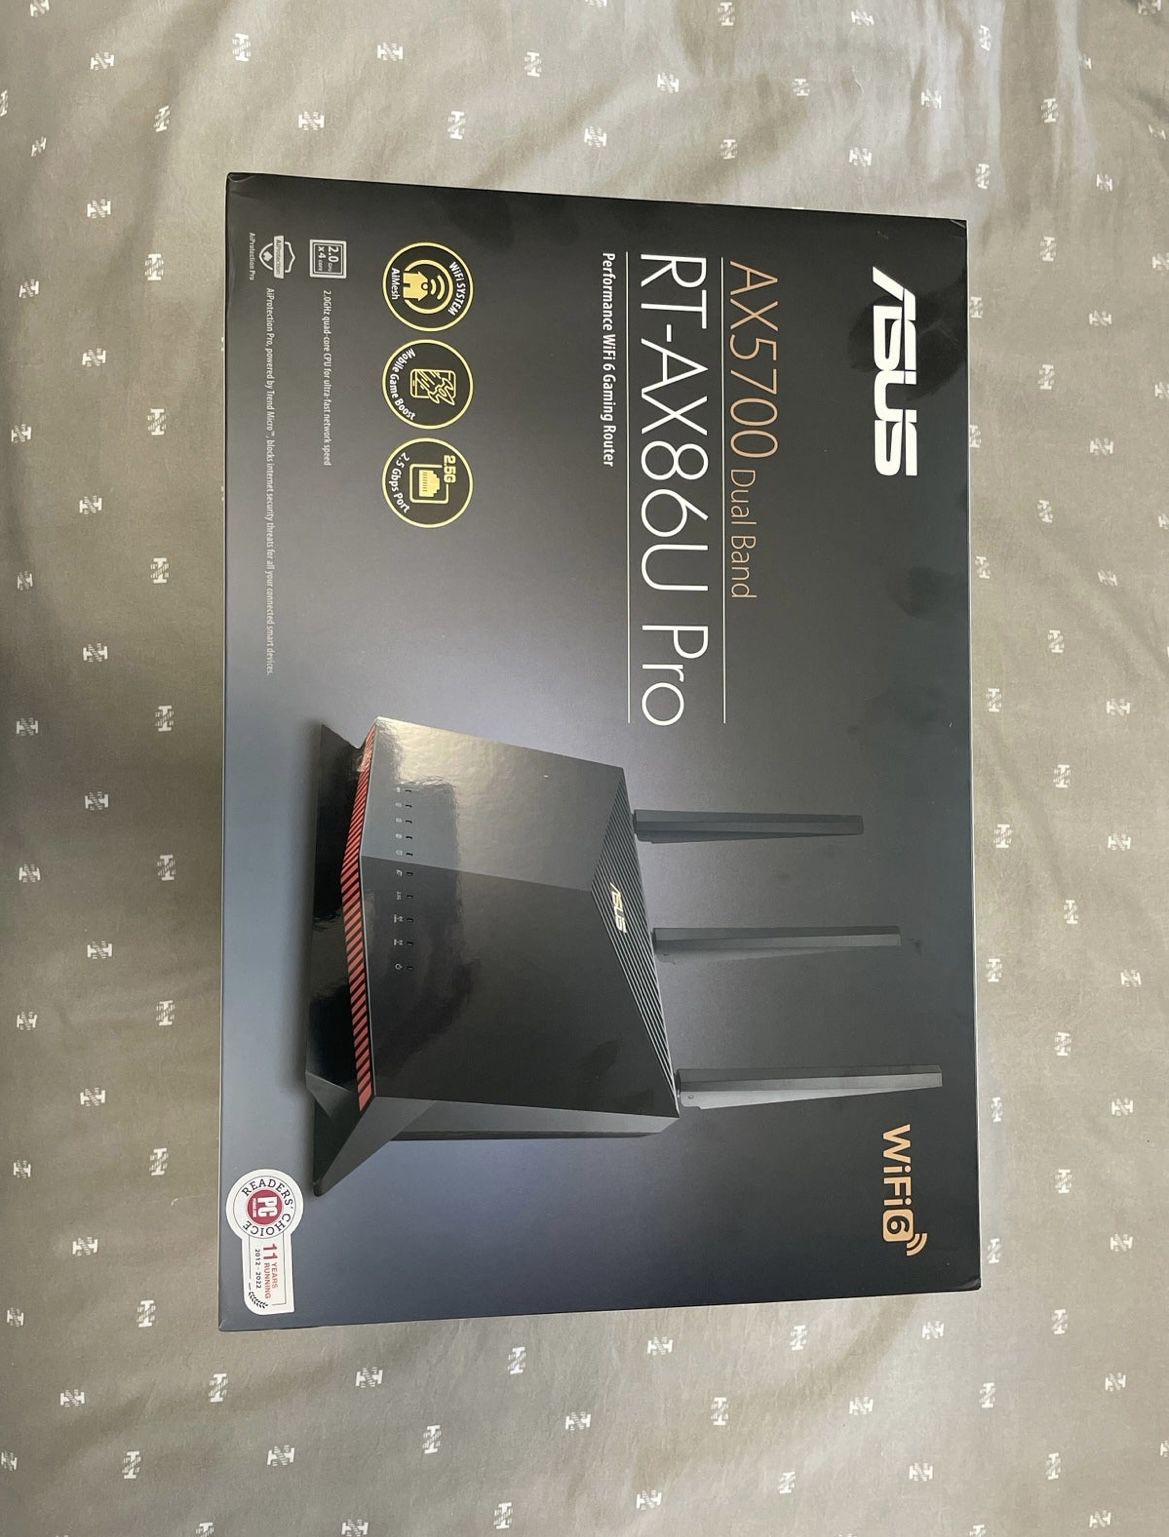 Asus Router